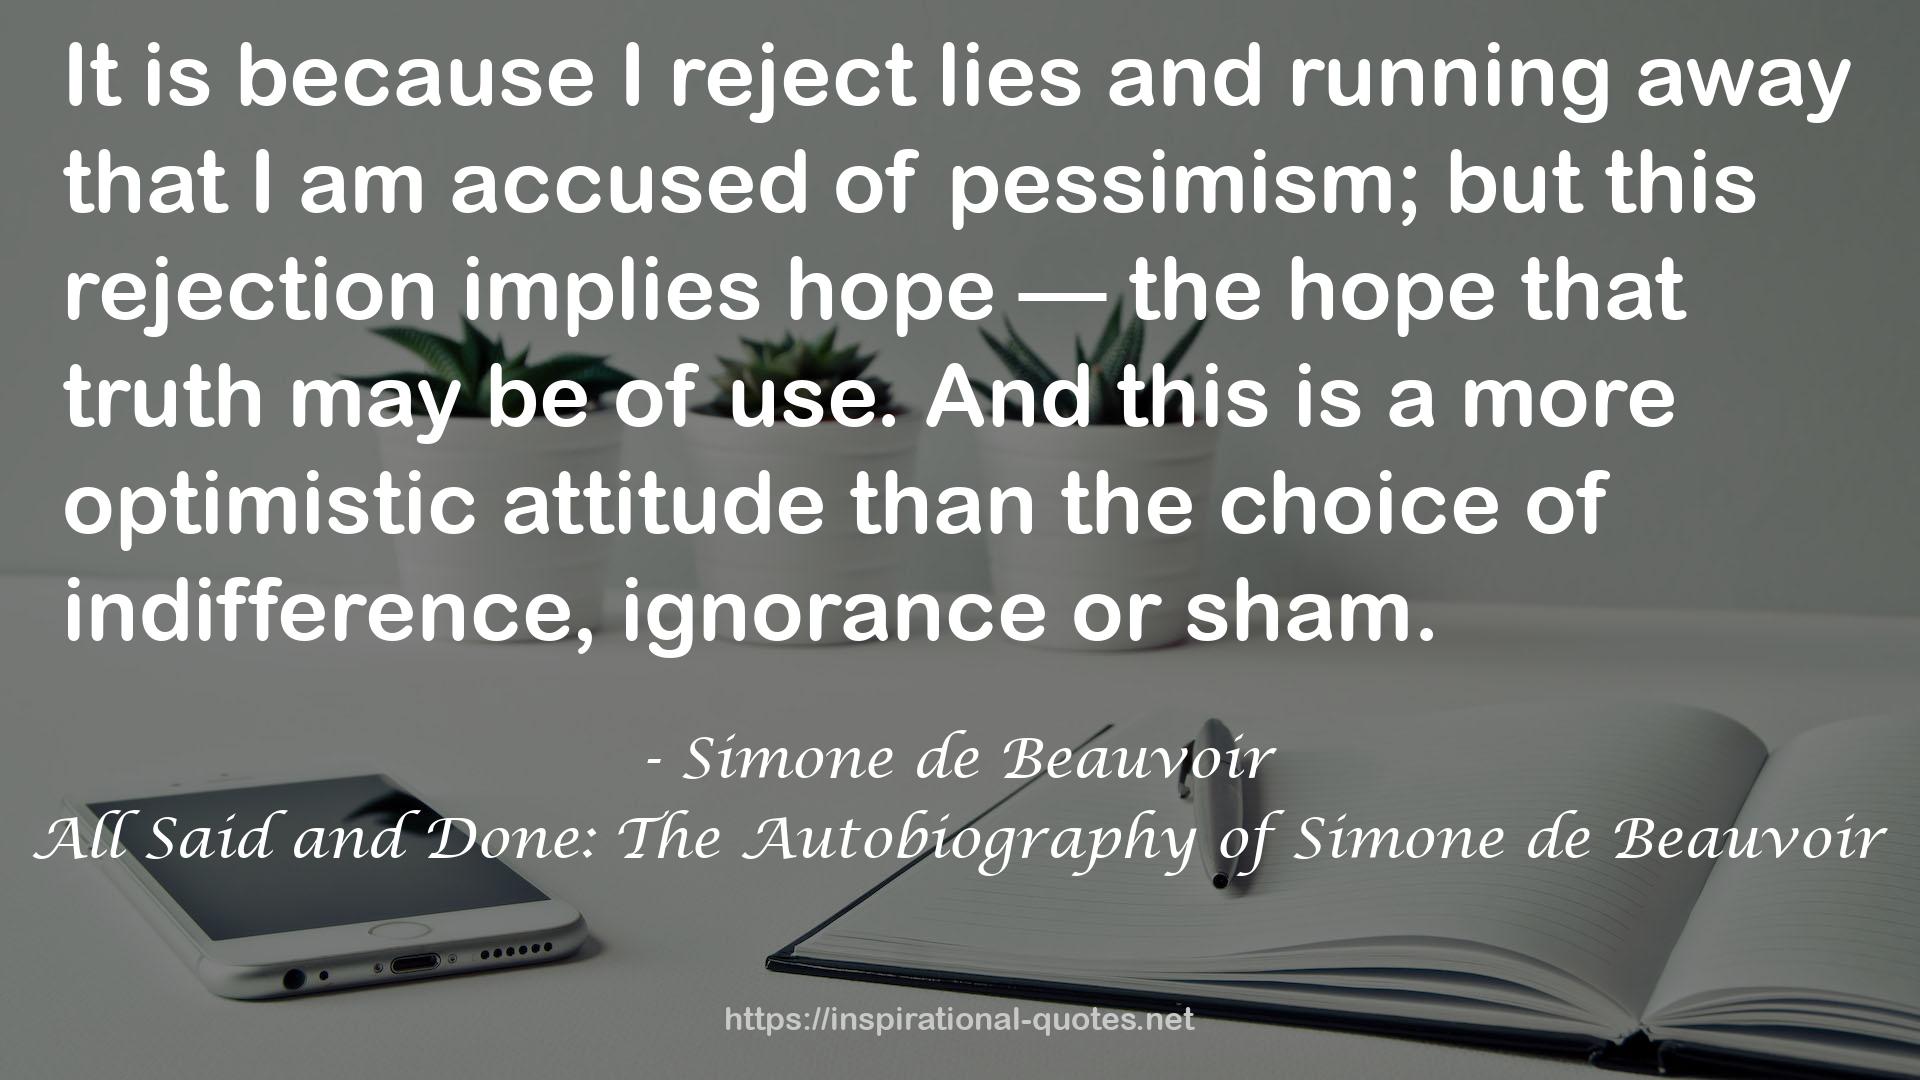 All Said and Done: The Autobiography of Simone de Beauvoir QUOTES